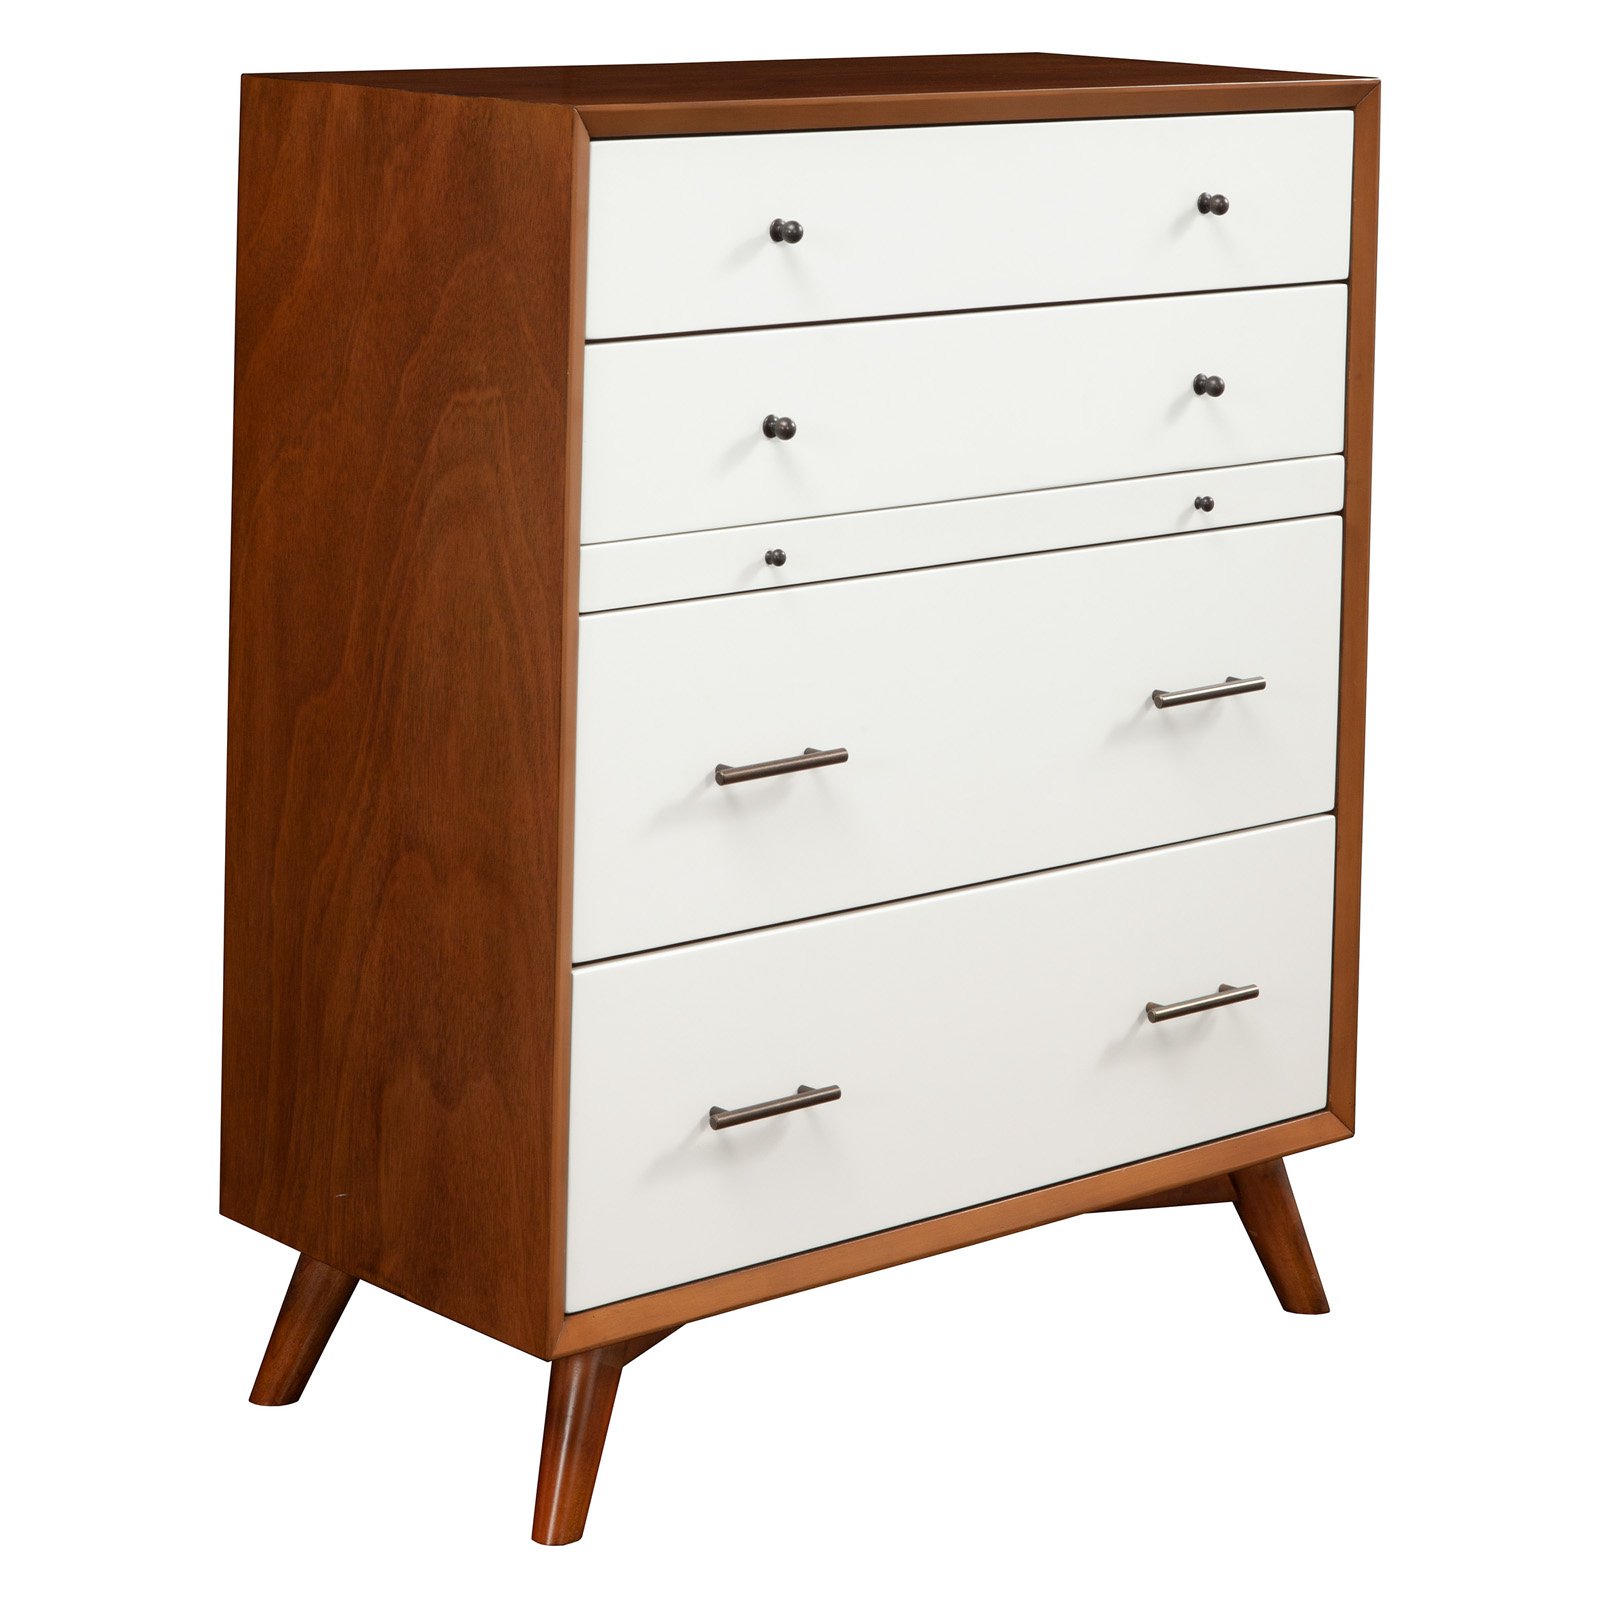 Alpine Furniture Flynn Mid Century Multi-function Wood Chest in Acorn-White - image 2 of 3